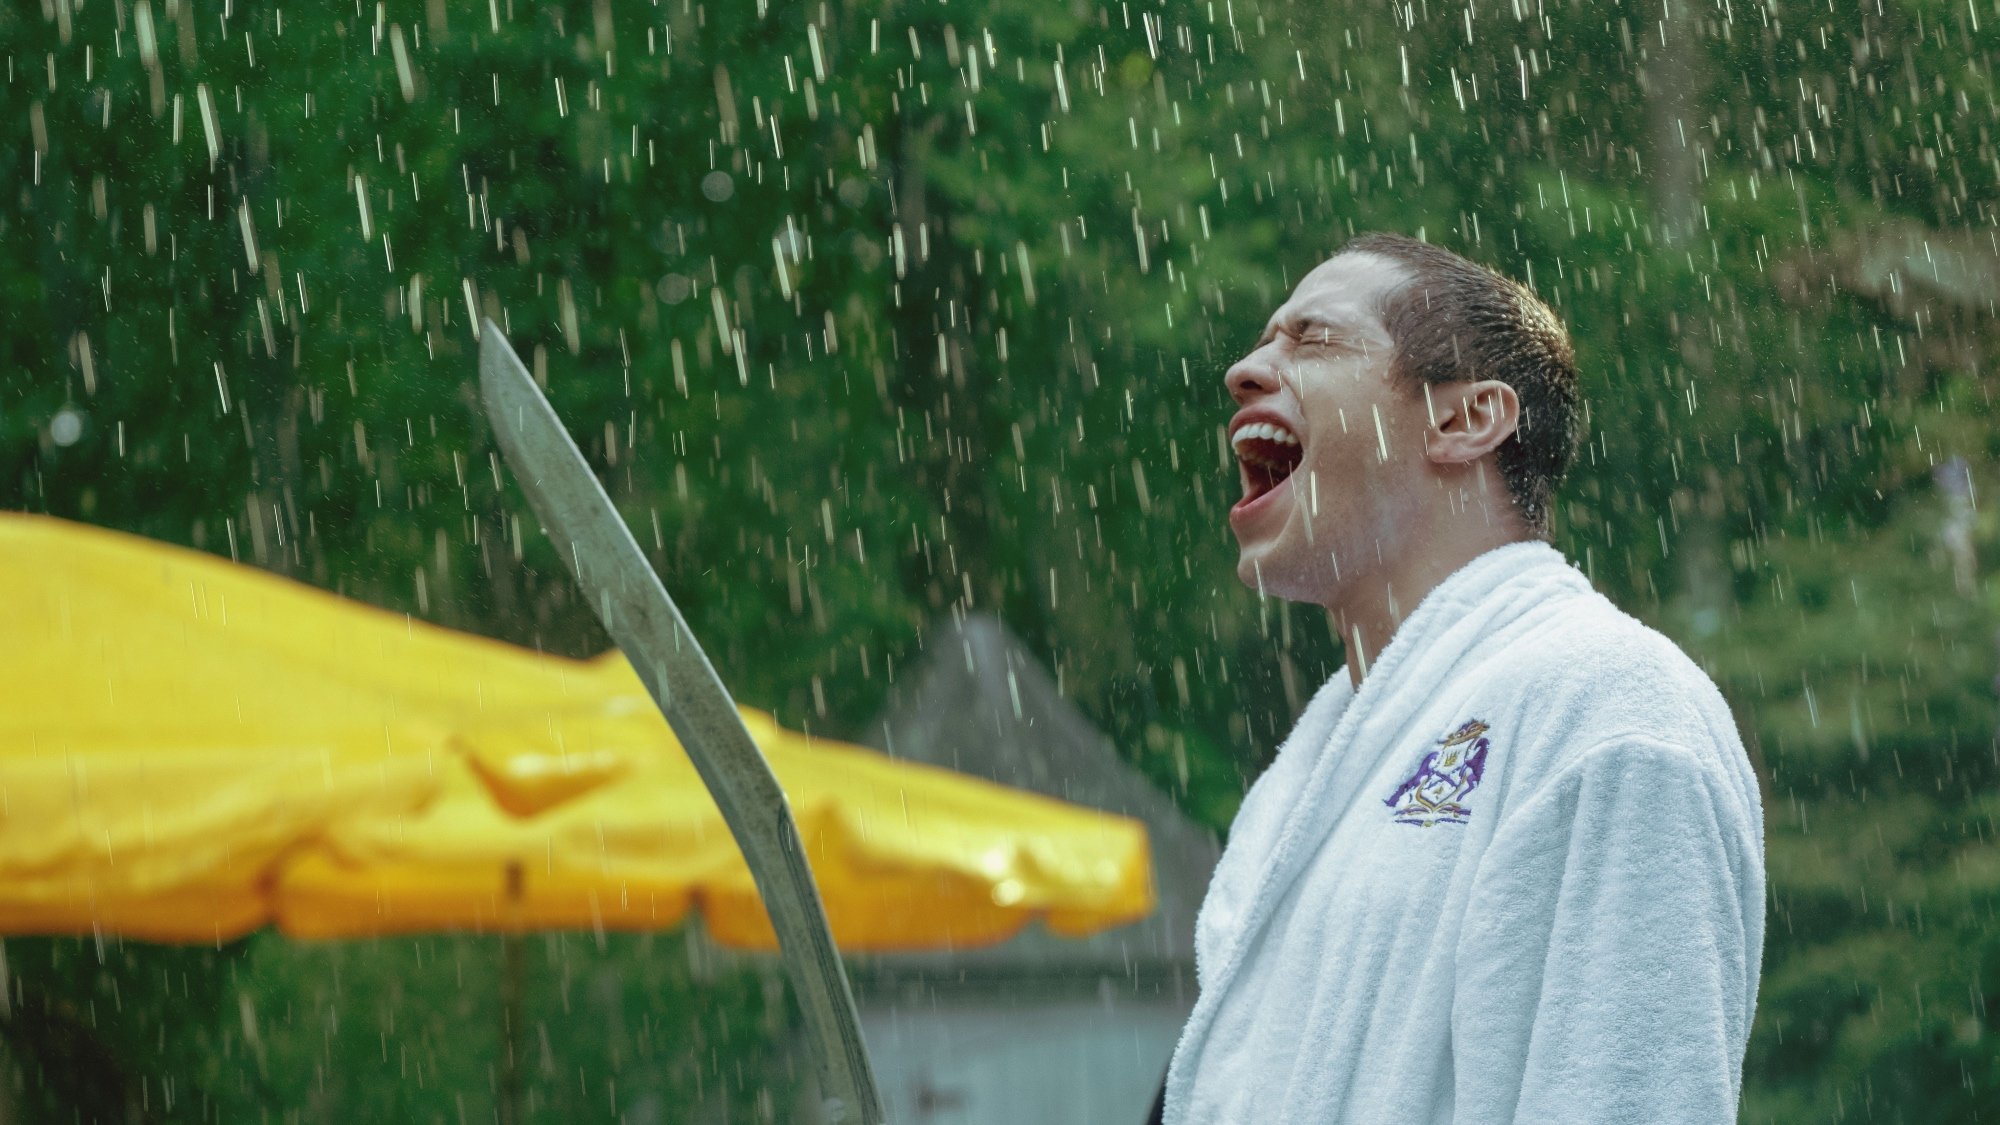 'Bodies Bodies Bodies' had a shocking ending with Pete Davidson as David. he's wearing a white robe and shouting, while holding a sword with rain falling all around him.